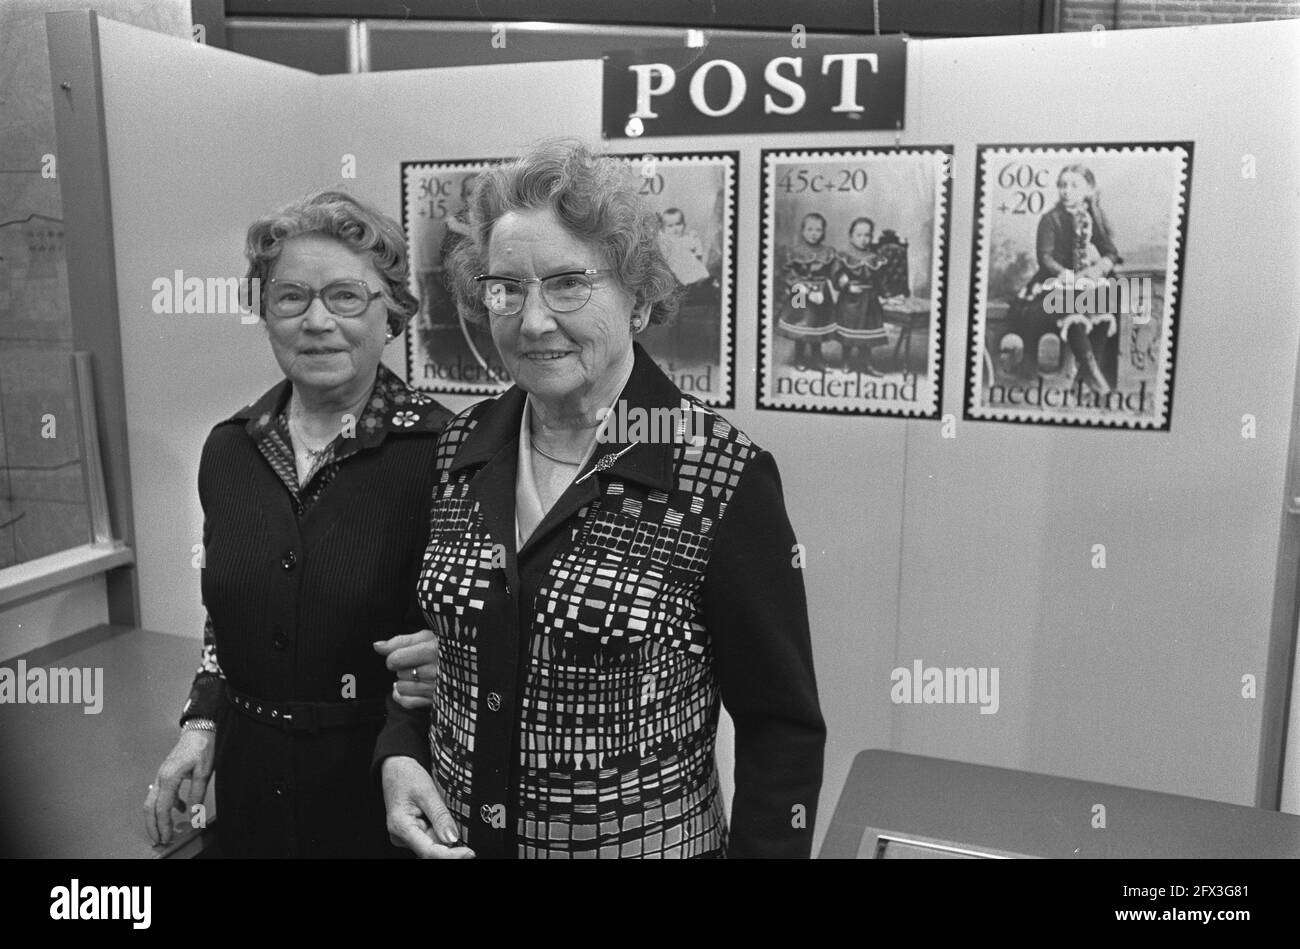 Minister Van Doorn (CRM) starts children's stamp action in The Hague, Sisters Van Bruggen, November 12, 1974, CHILDREN'S POSTAGE STAMPS, Ministers, The Netherlands, 20th century press agency photo, news to remember, documentary, historic photography 1945-1990, visual stories, human history of the Twentieth Century, capturing moments in time Stock Photo